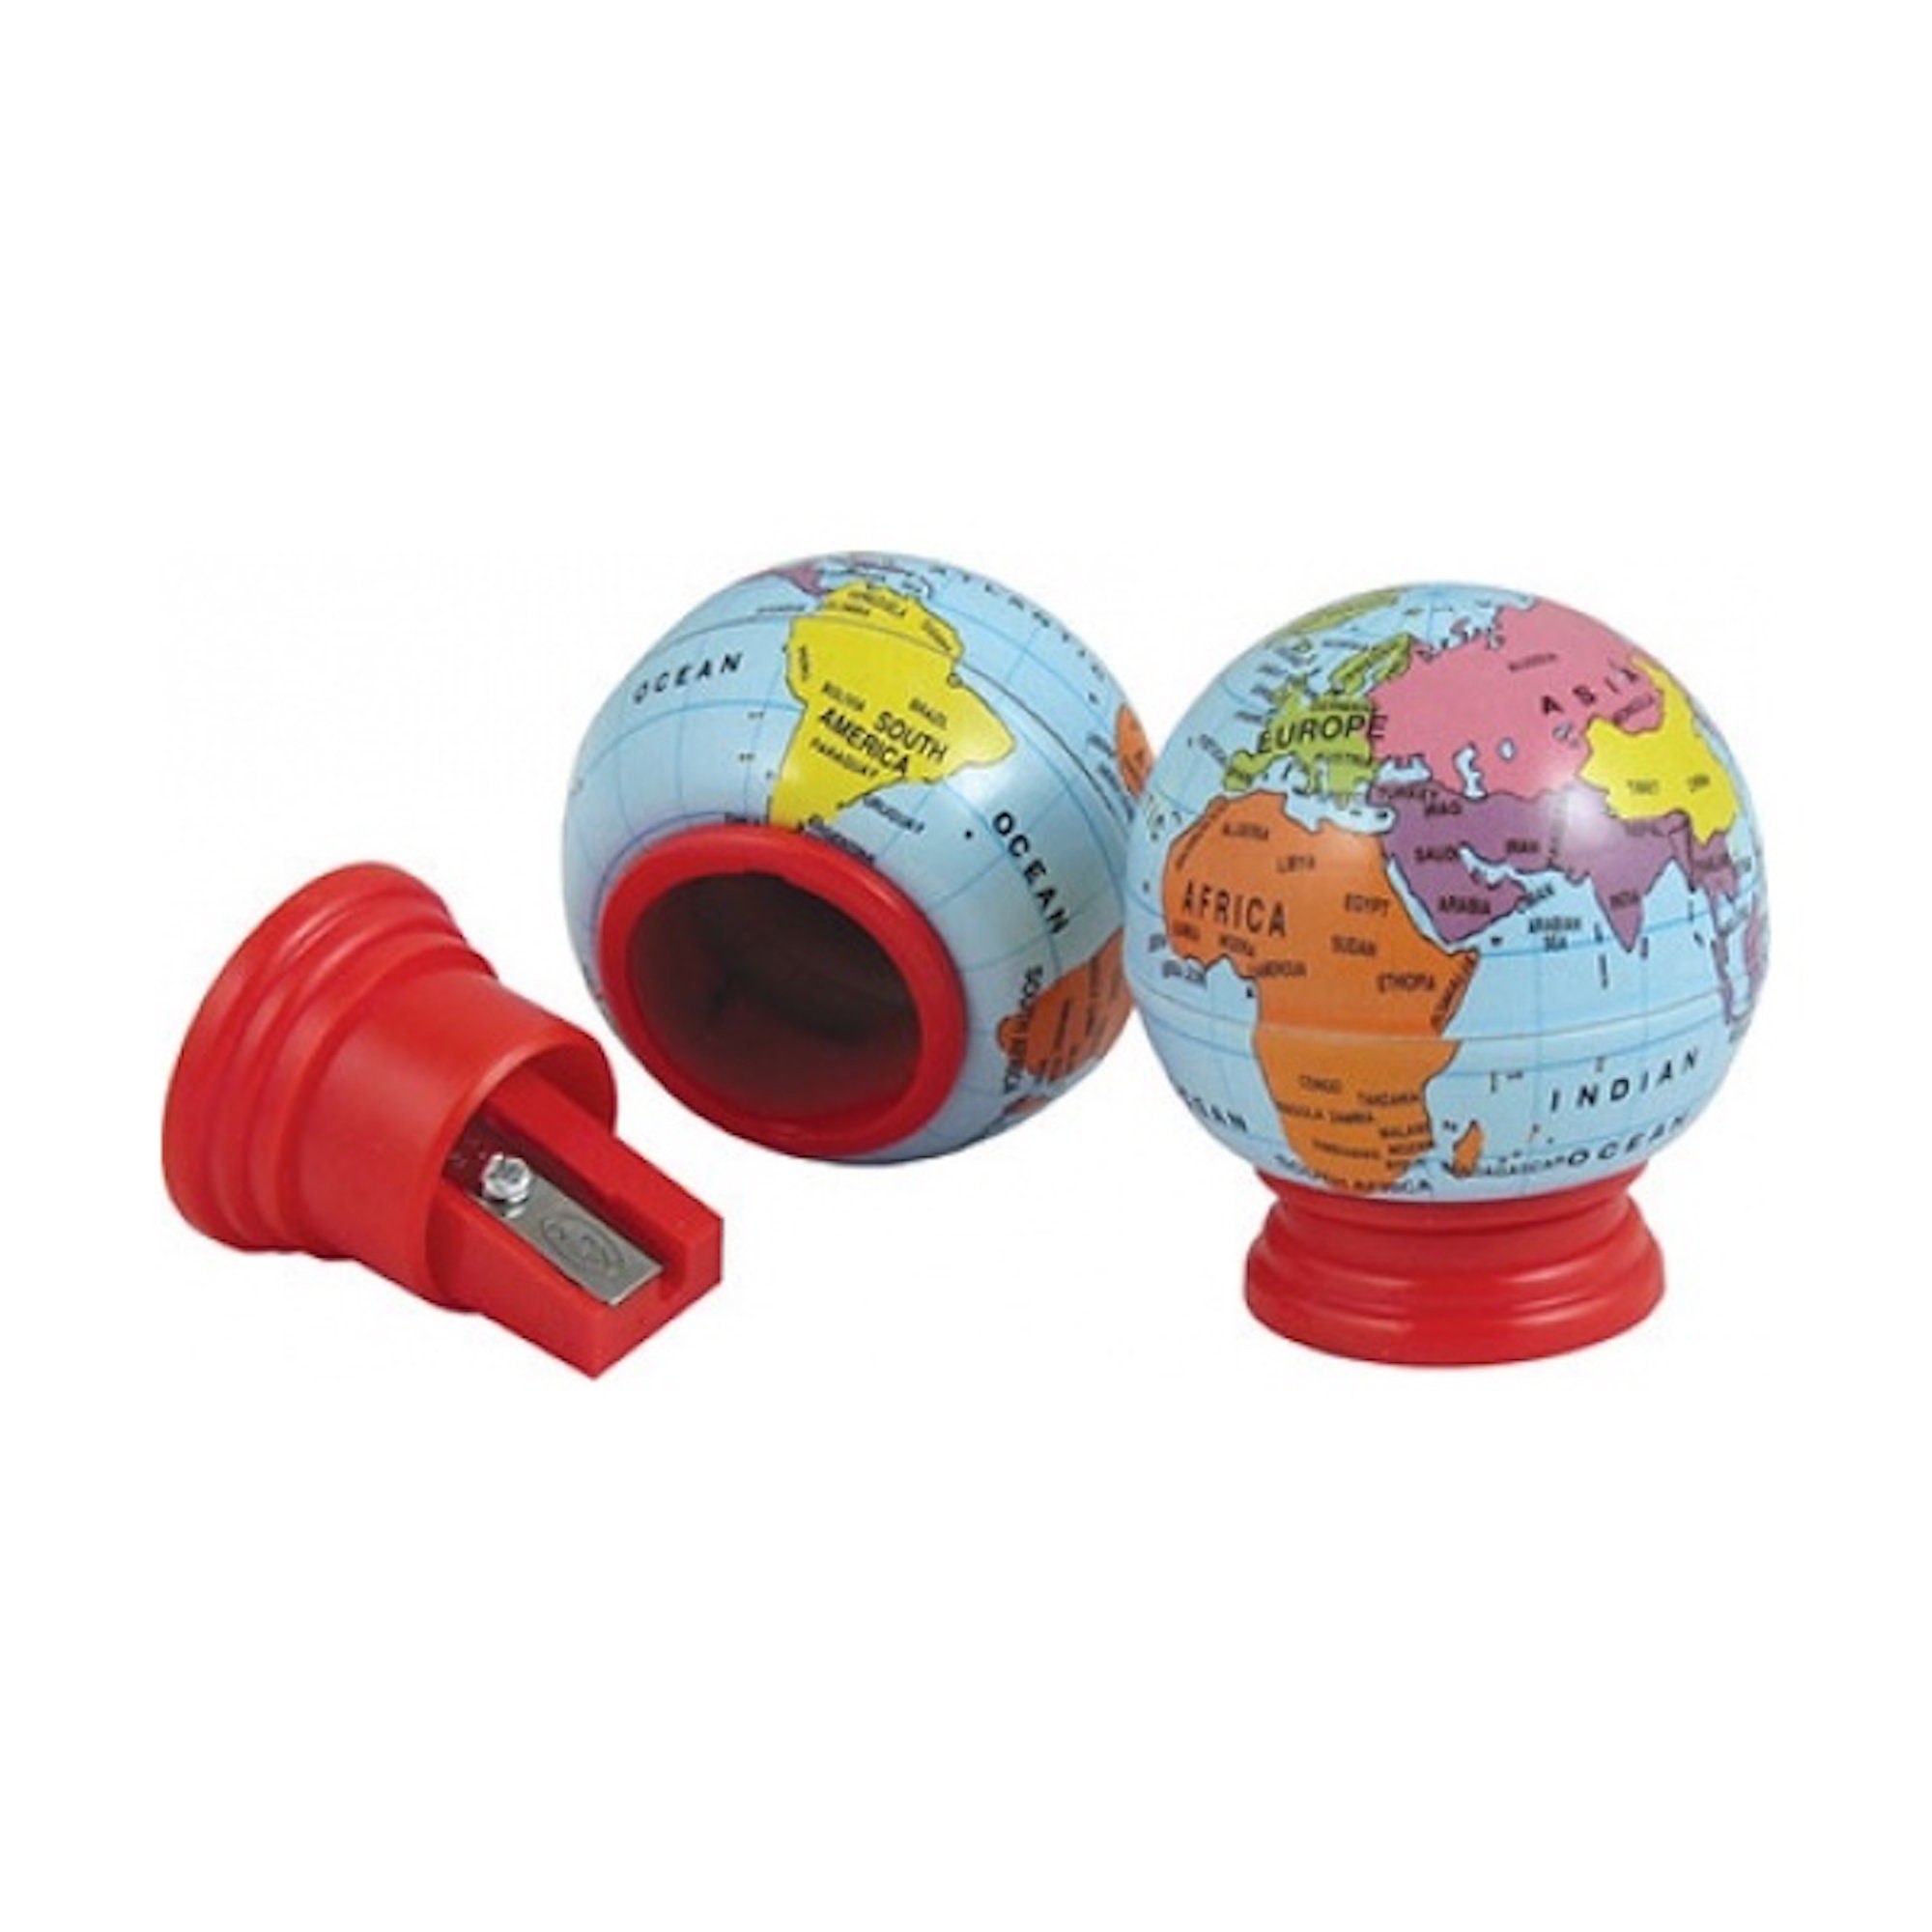 Taille-crayons globe